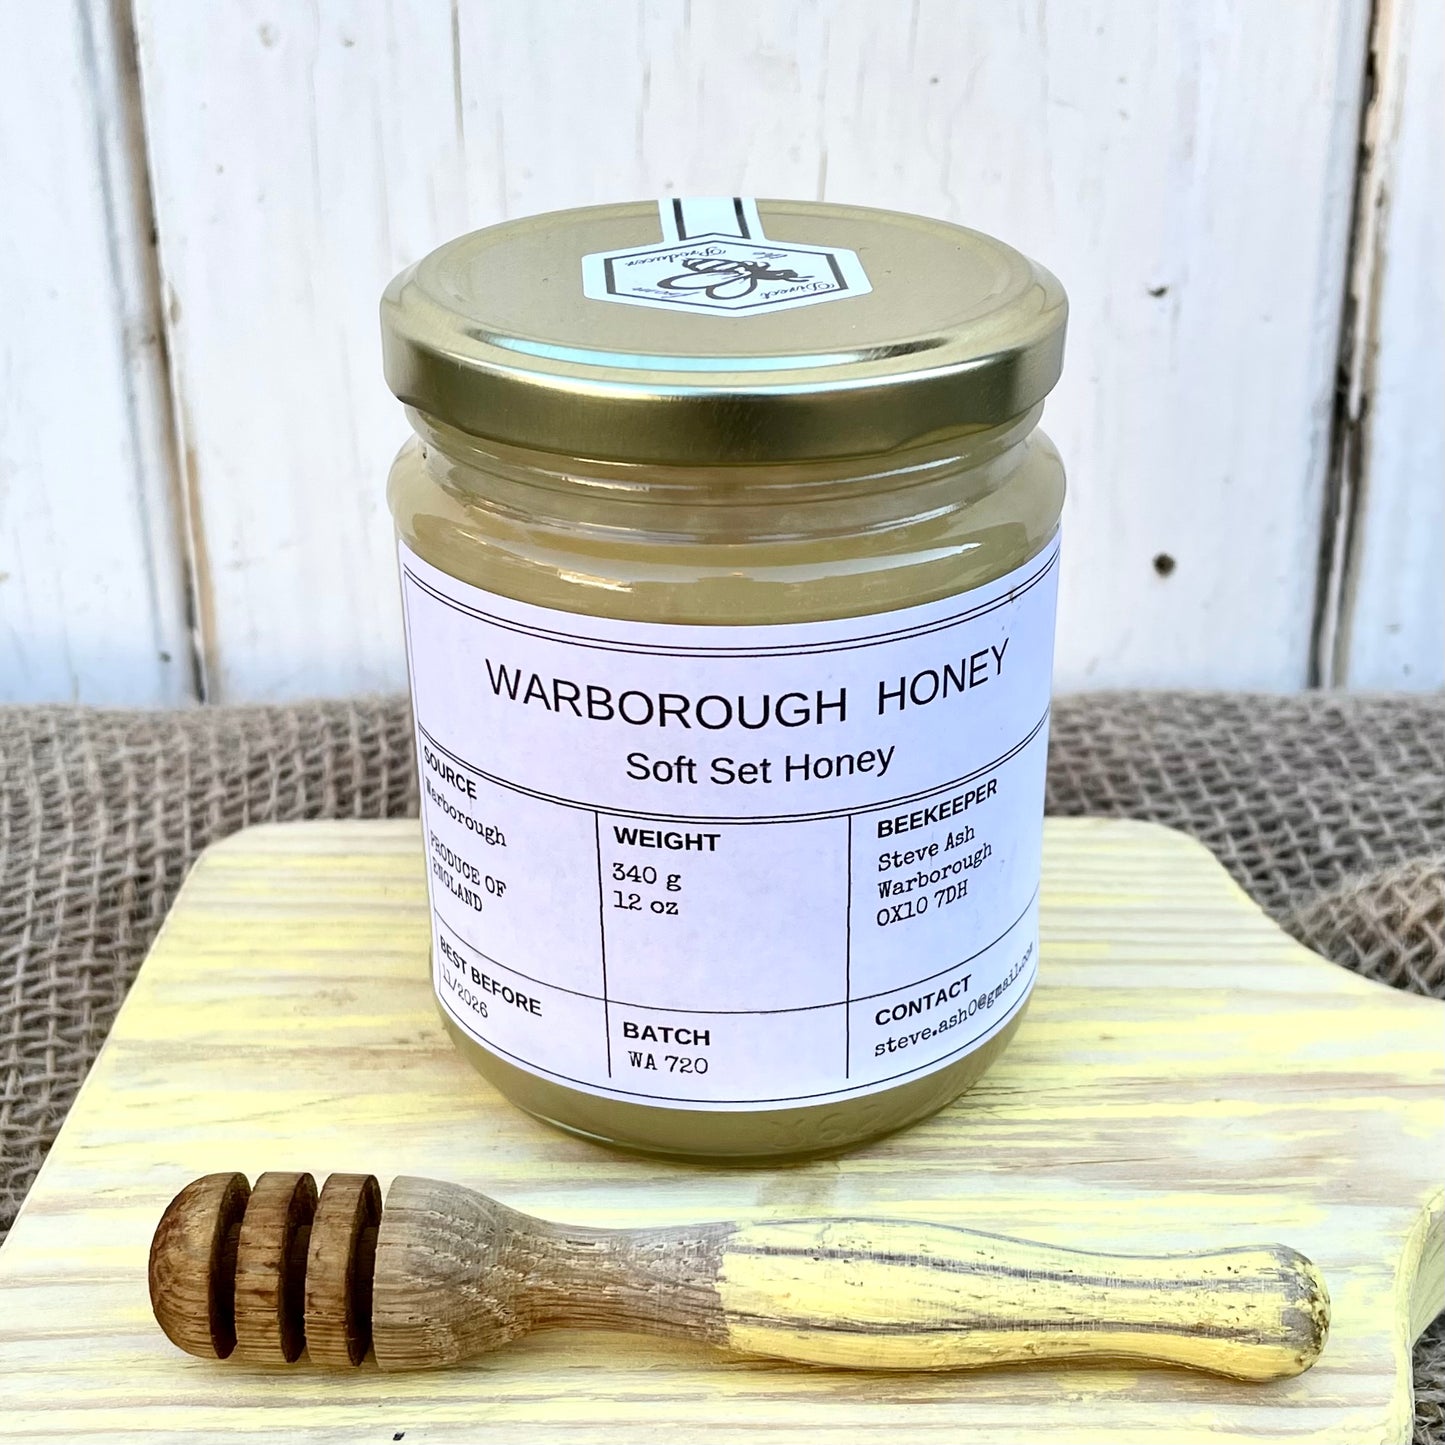 Waborough Soft Set Honey (Sold Out)